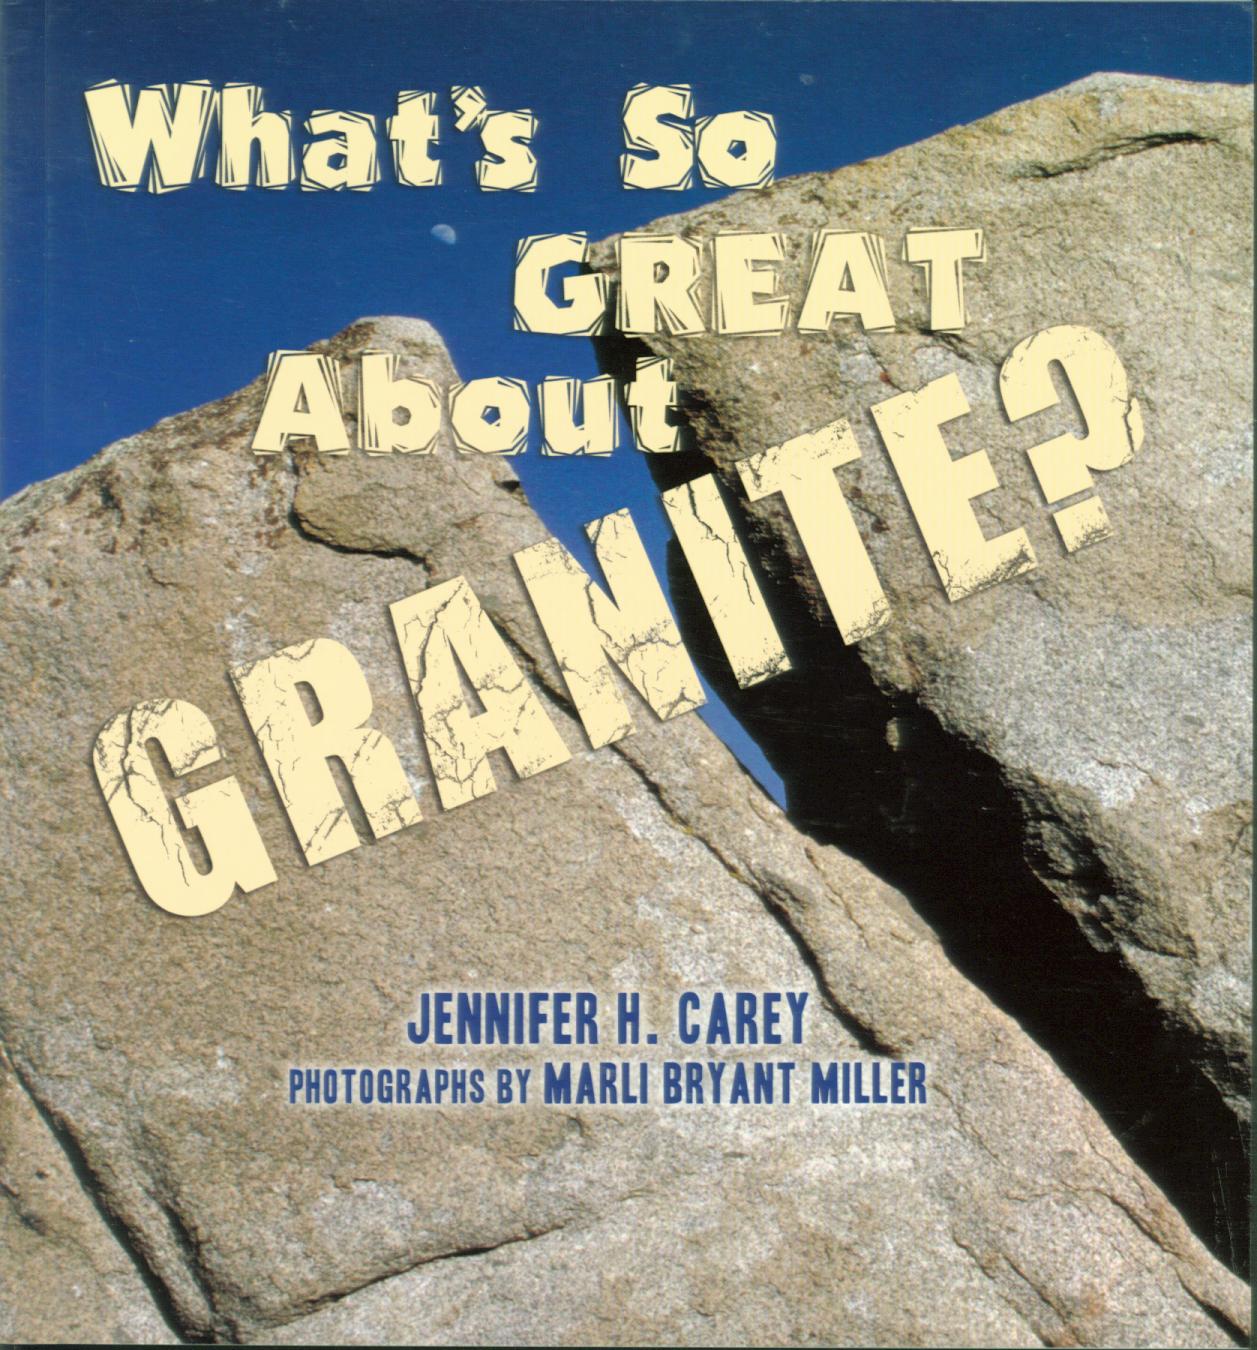 What's So Great About Granite?